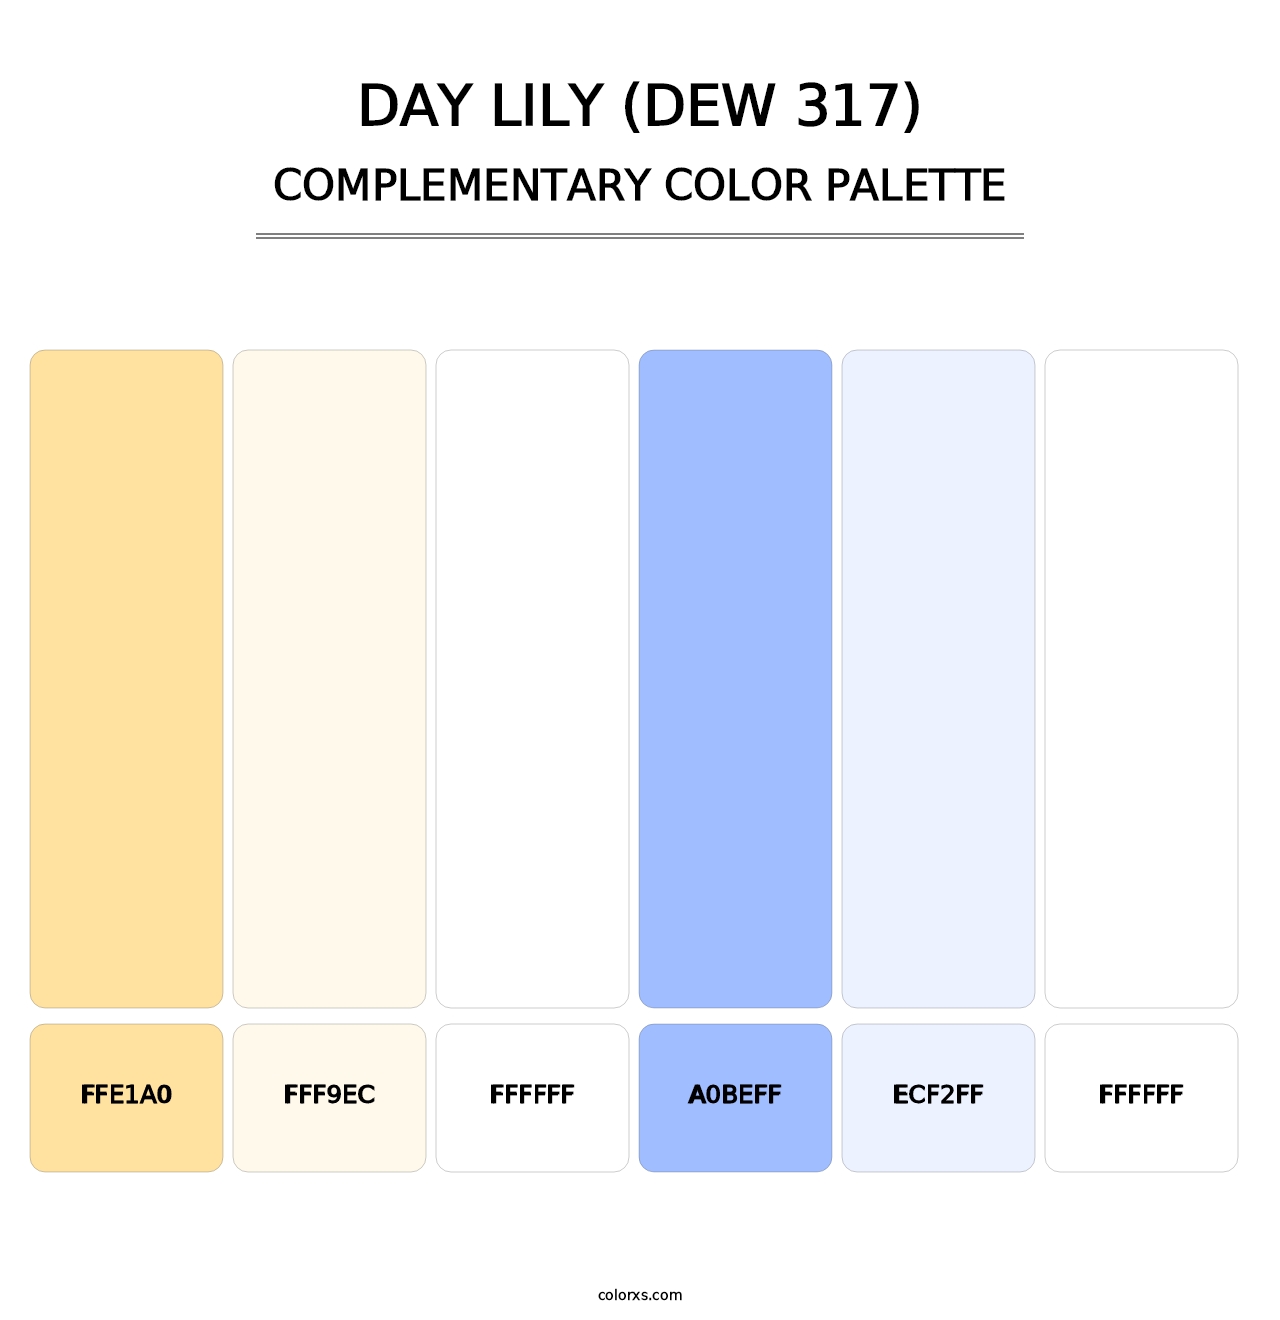 Day Lily (DEW 317) - Complementary Color Palette